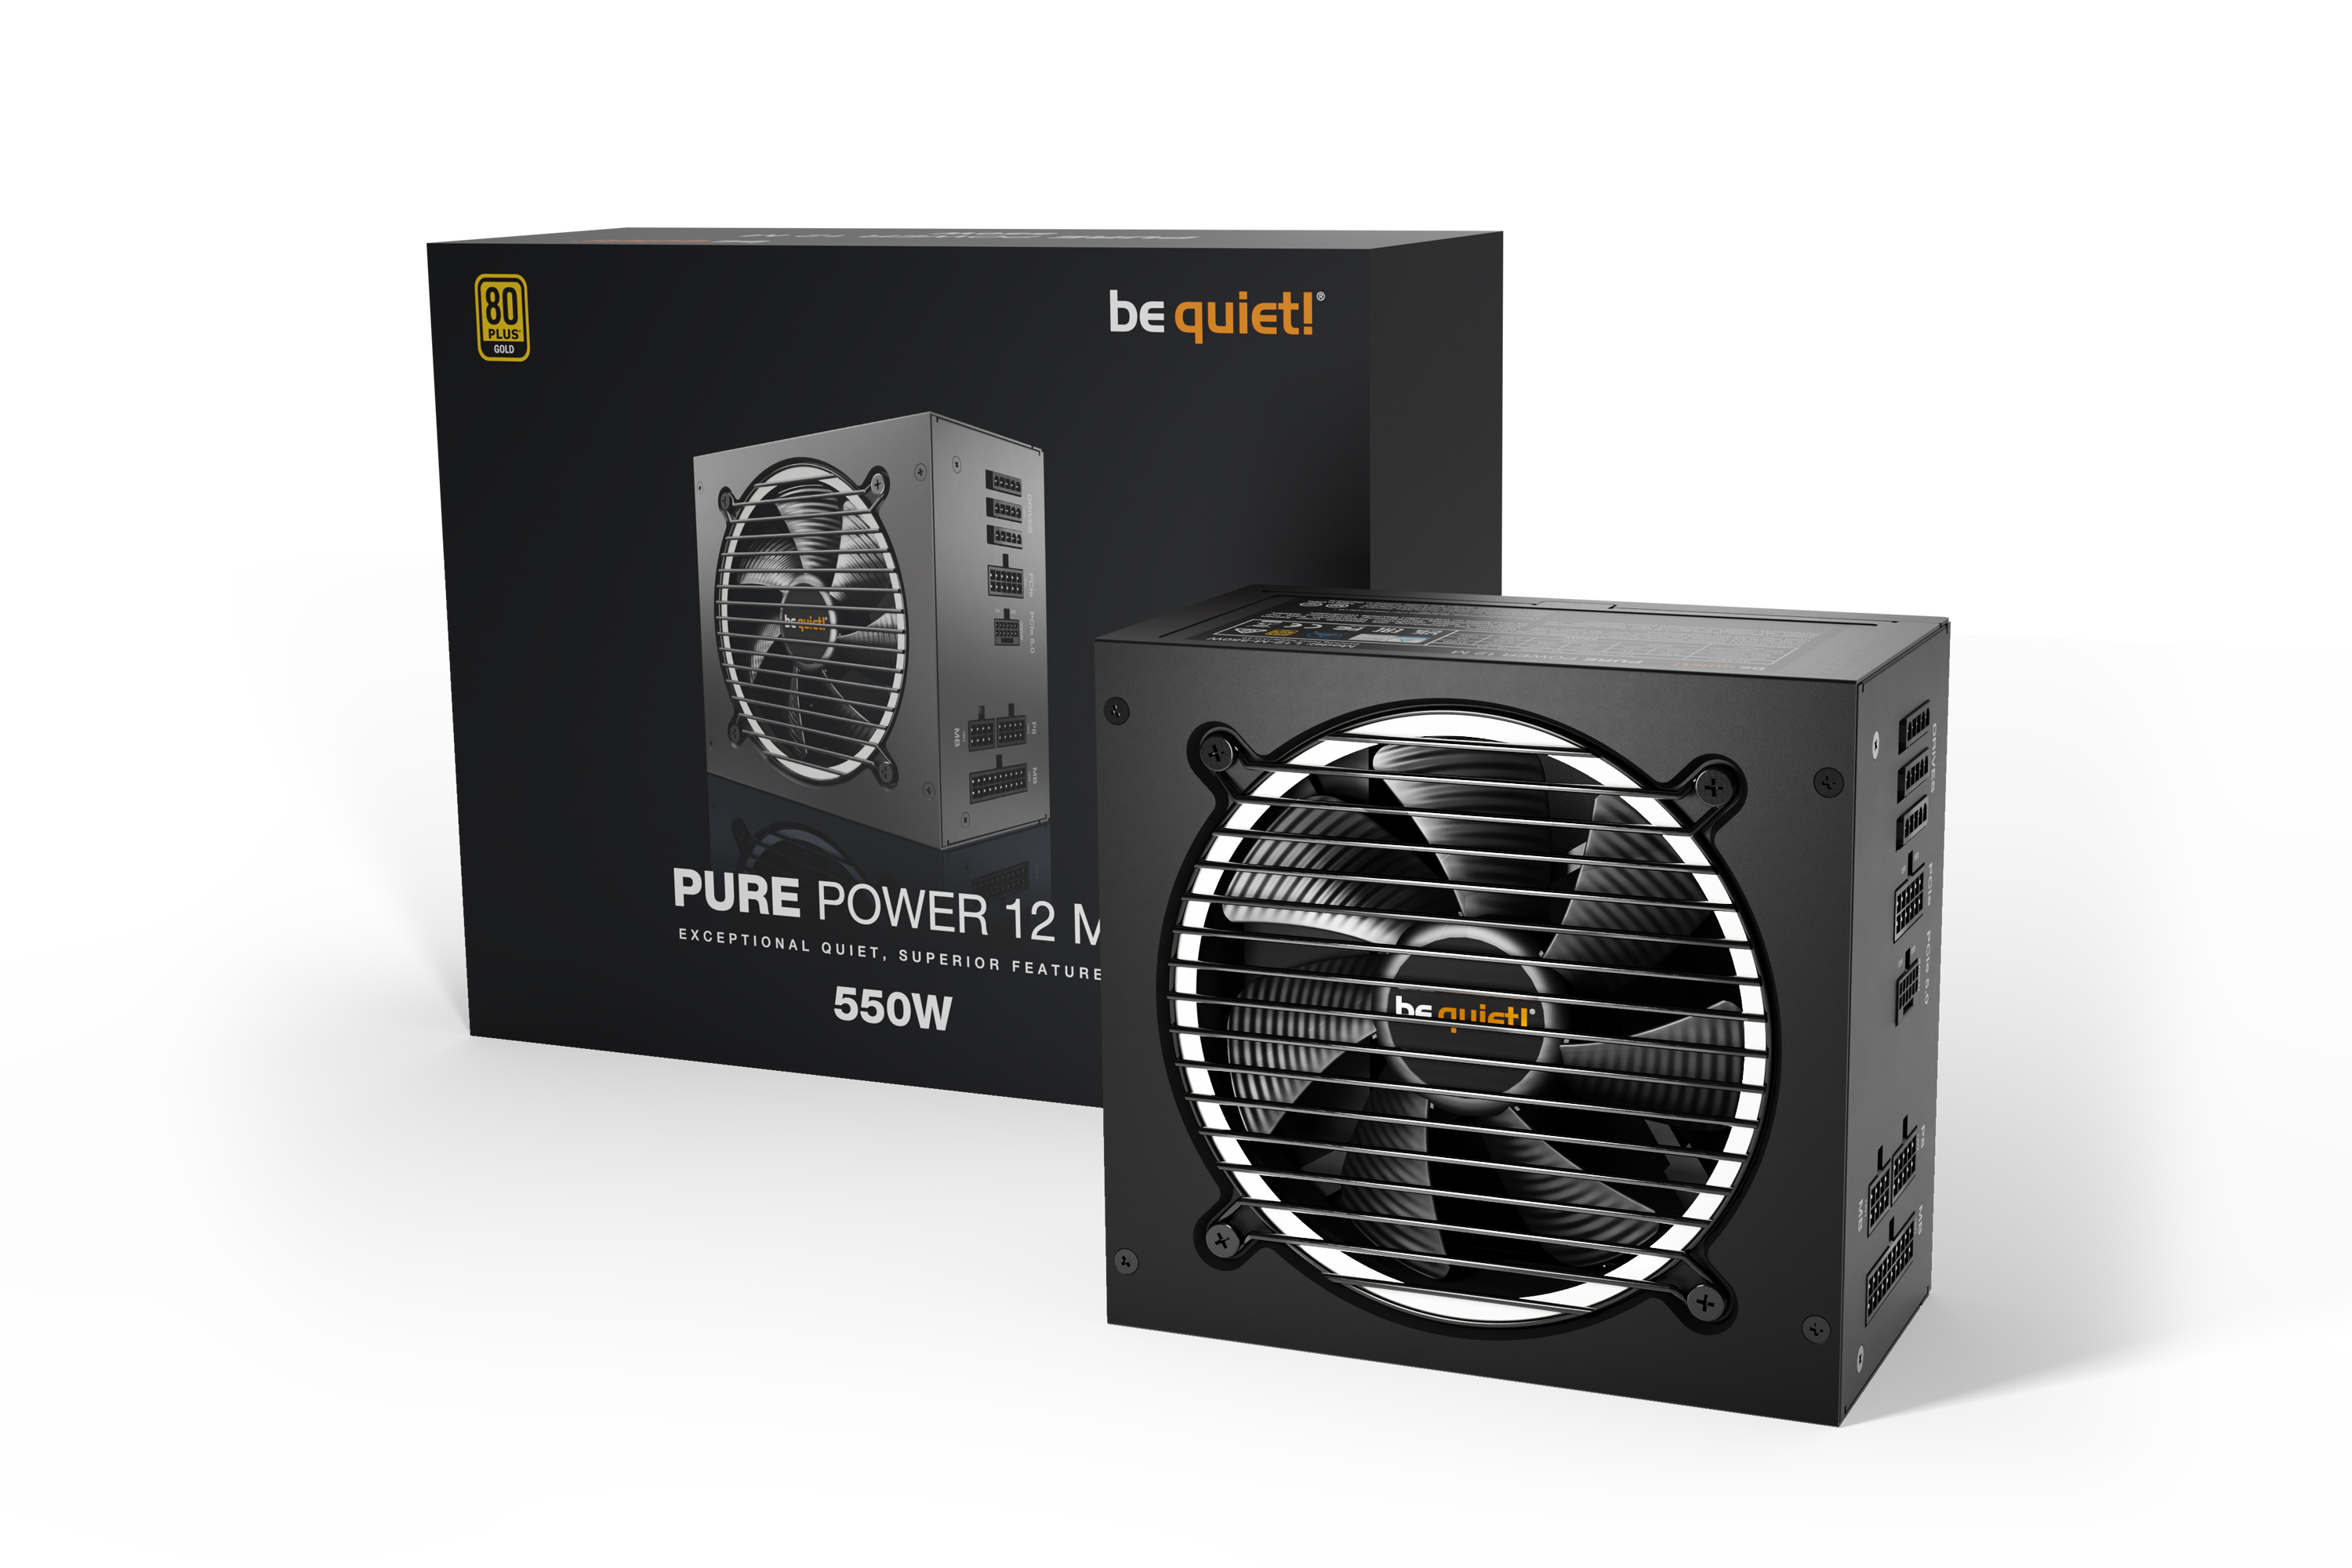   550W be quiet! PURE POWER 12 M (BN341)